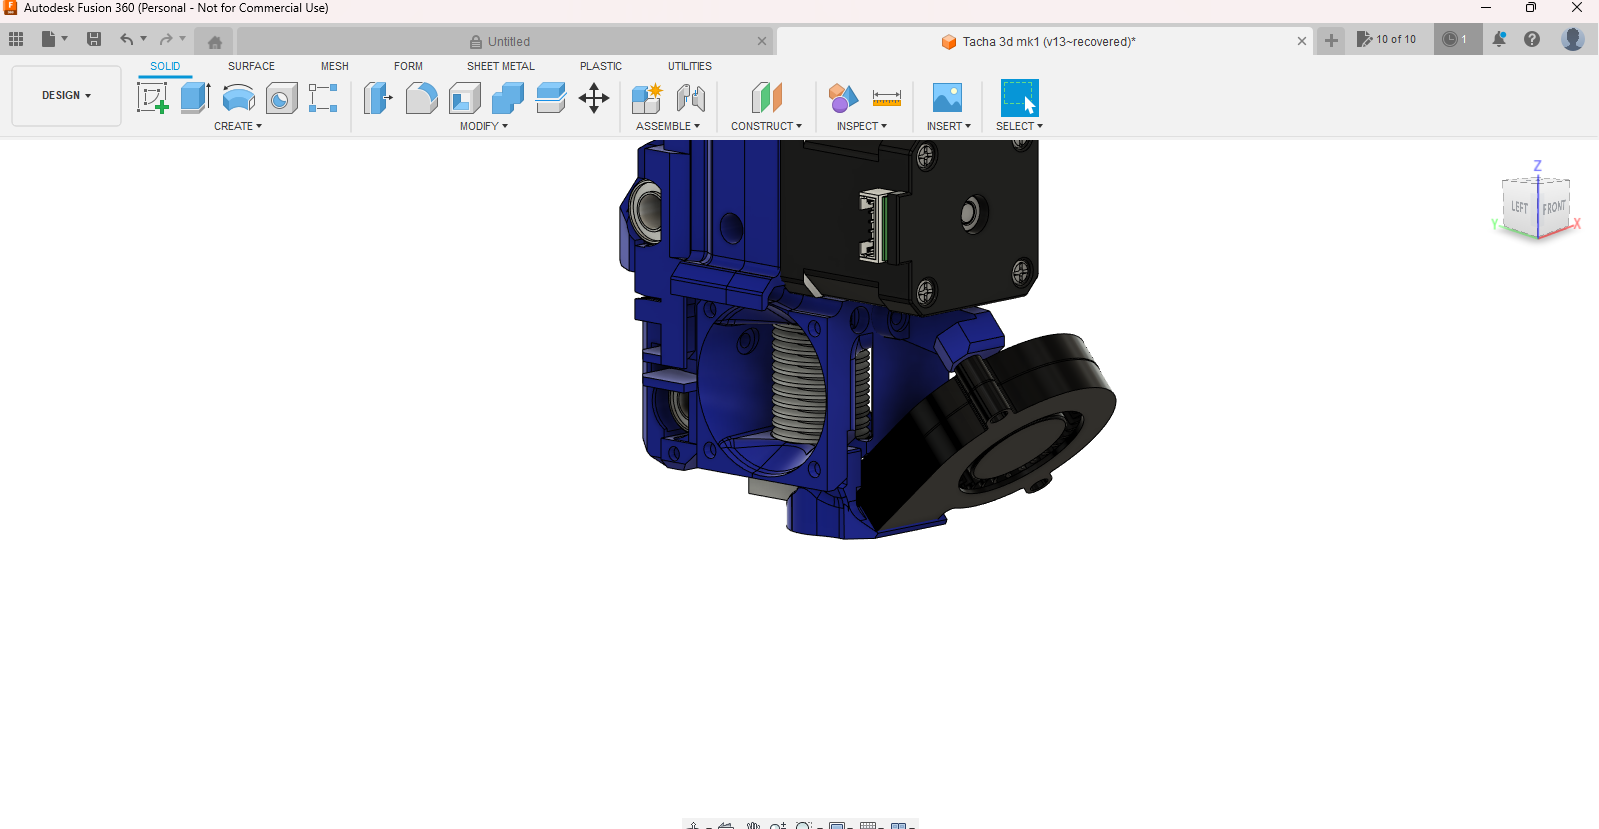 Autodesk Fusion 360 (Personal - Not for Commercial Use) 6_29_2023 10_12_13 PM.png